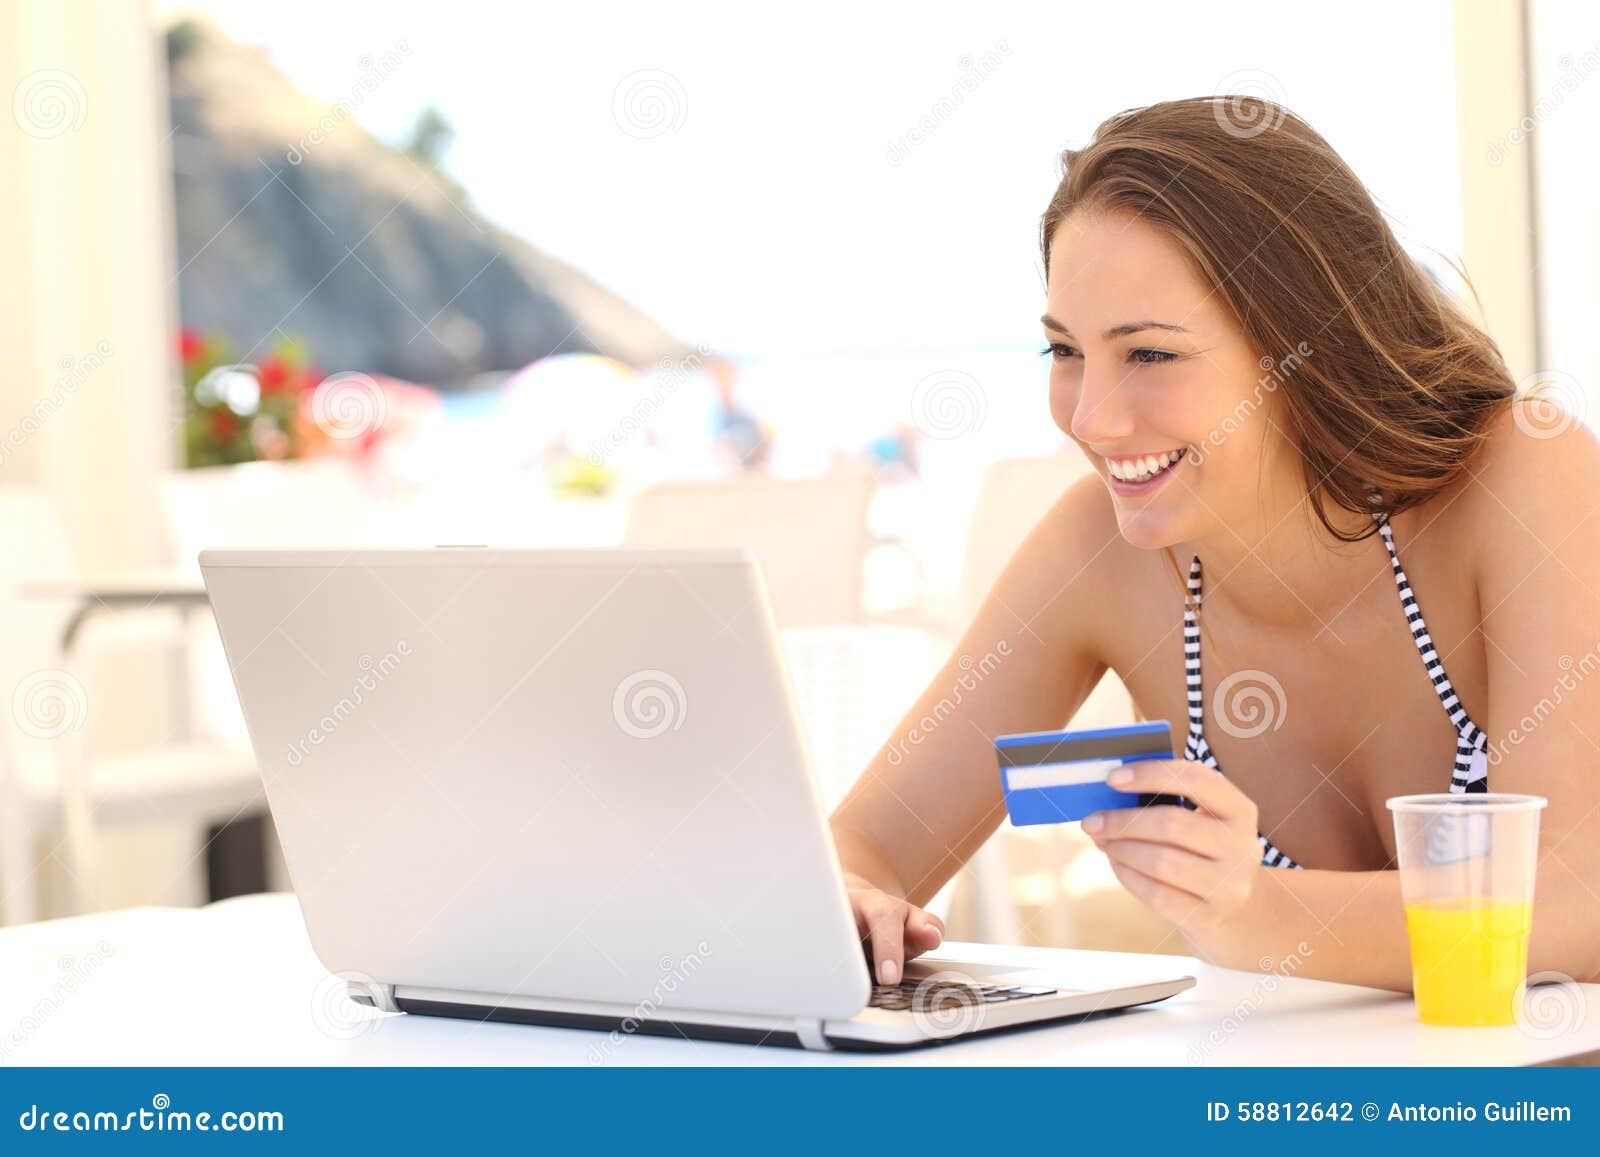 woman buying online on vacations